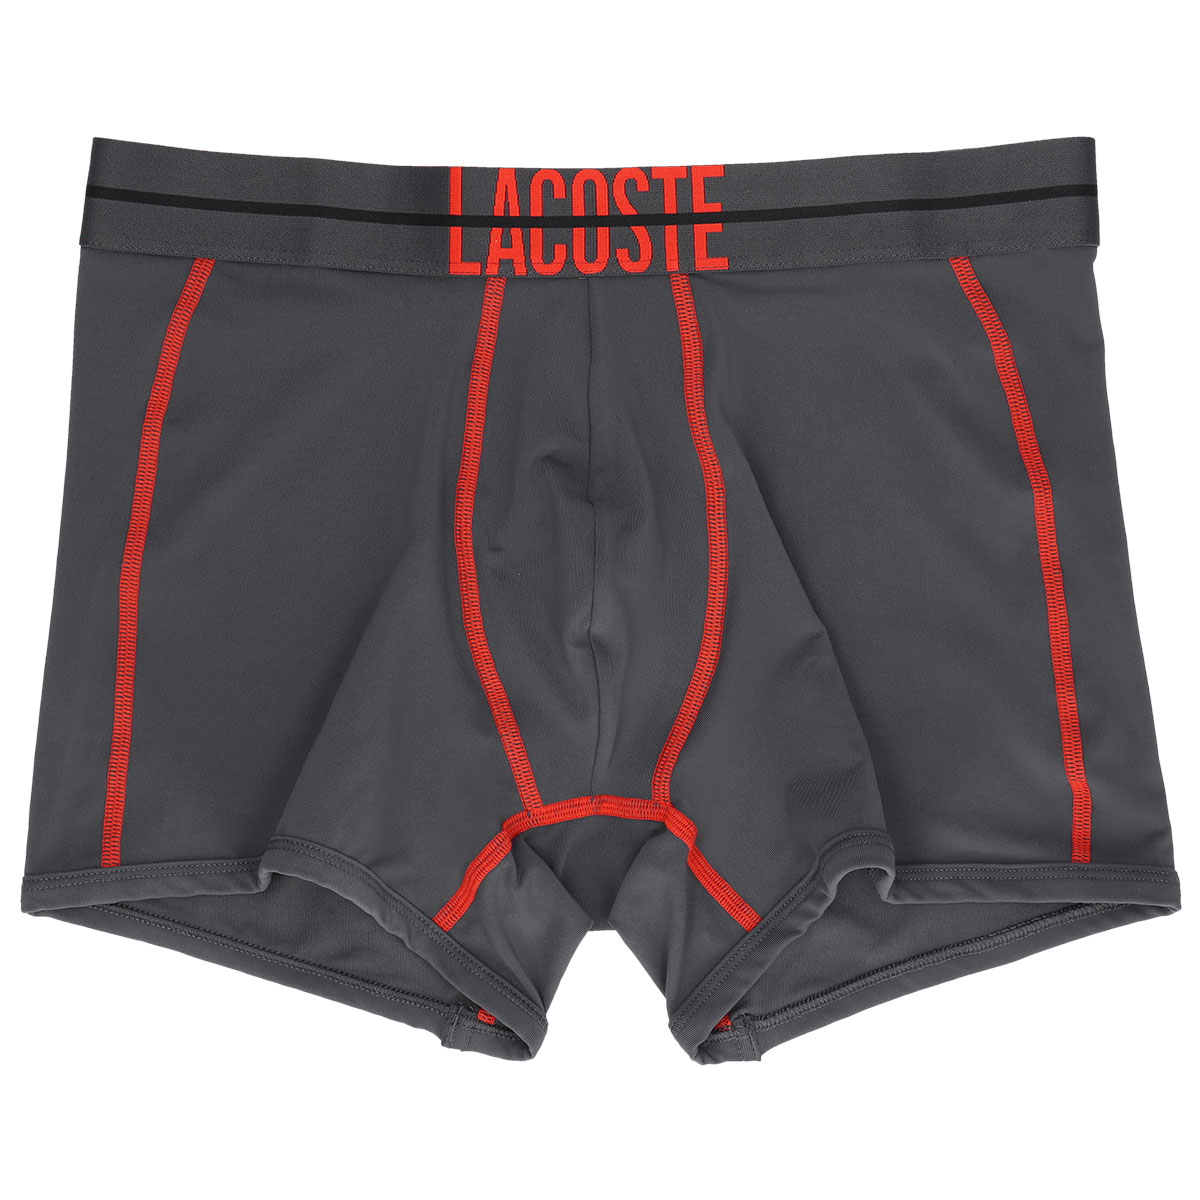 LACOSTE ラコステ CORE ACTIVE TRUNK コア アクティブ ボクサーパンツ 前閉...